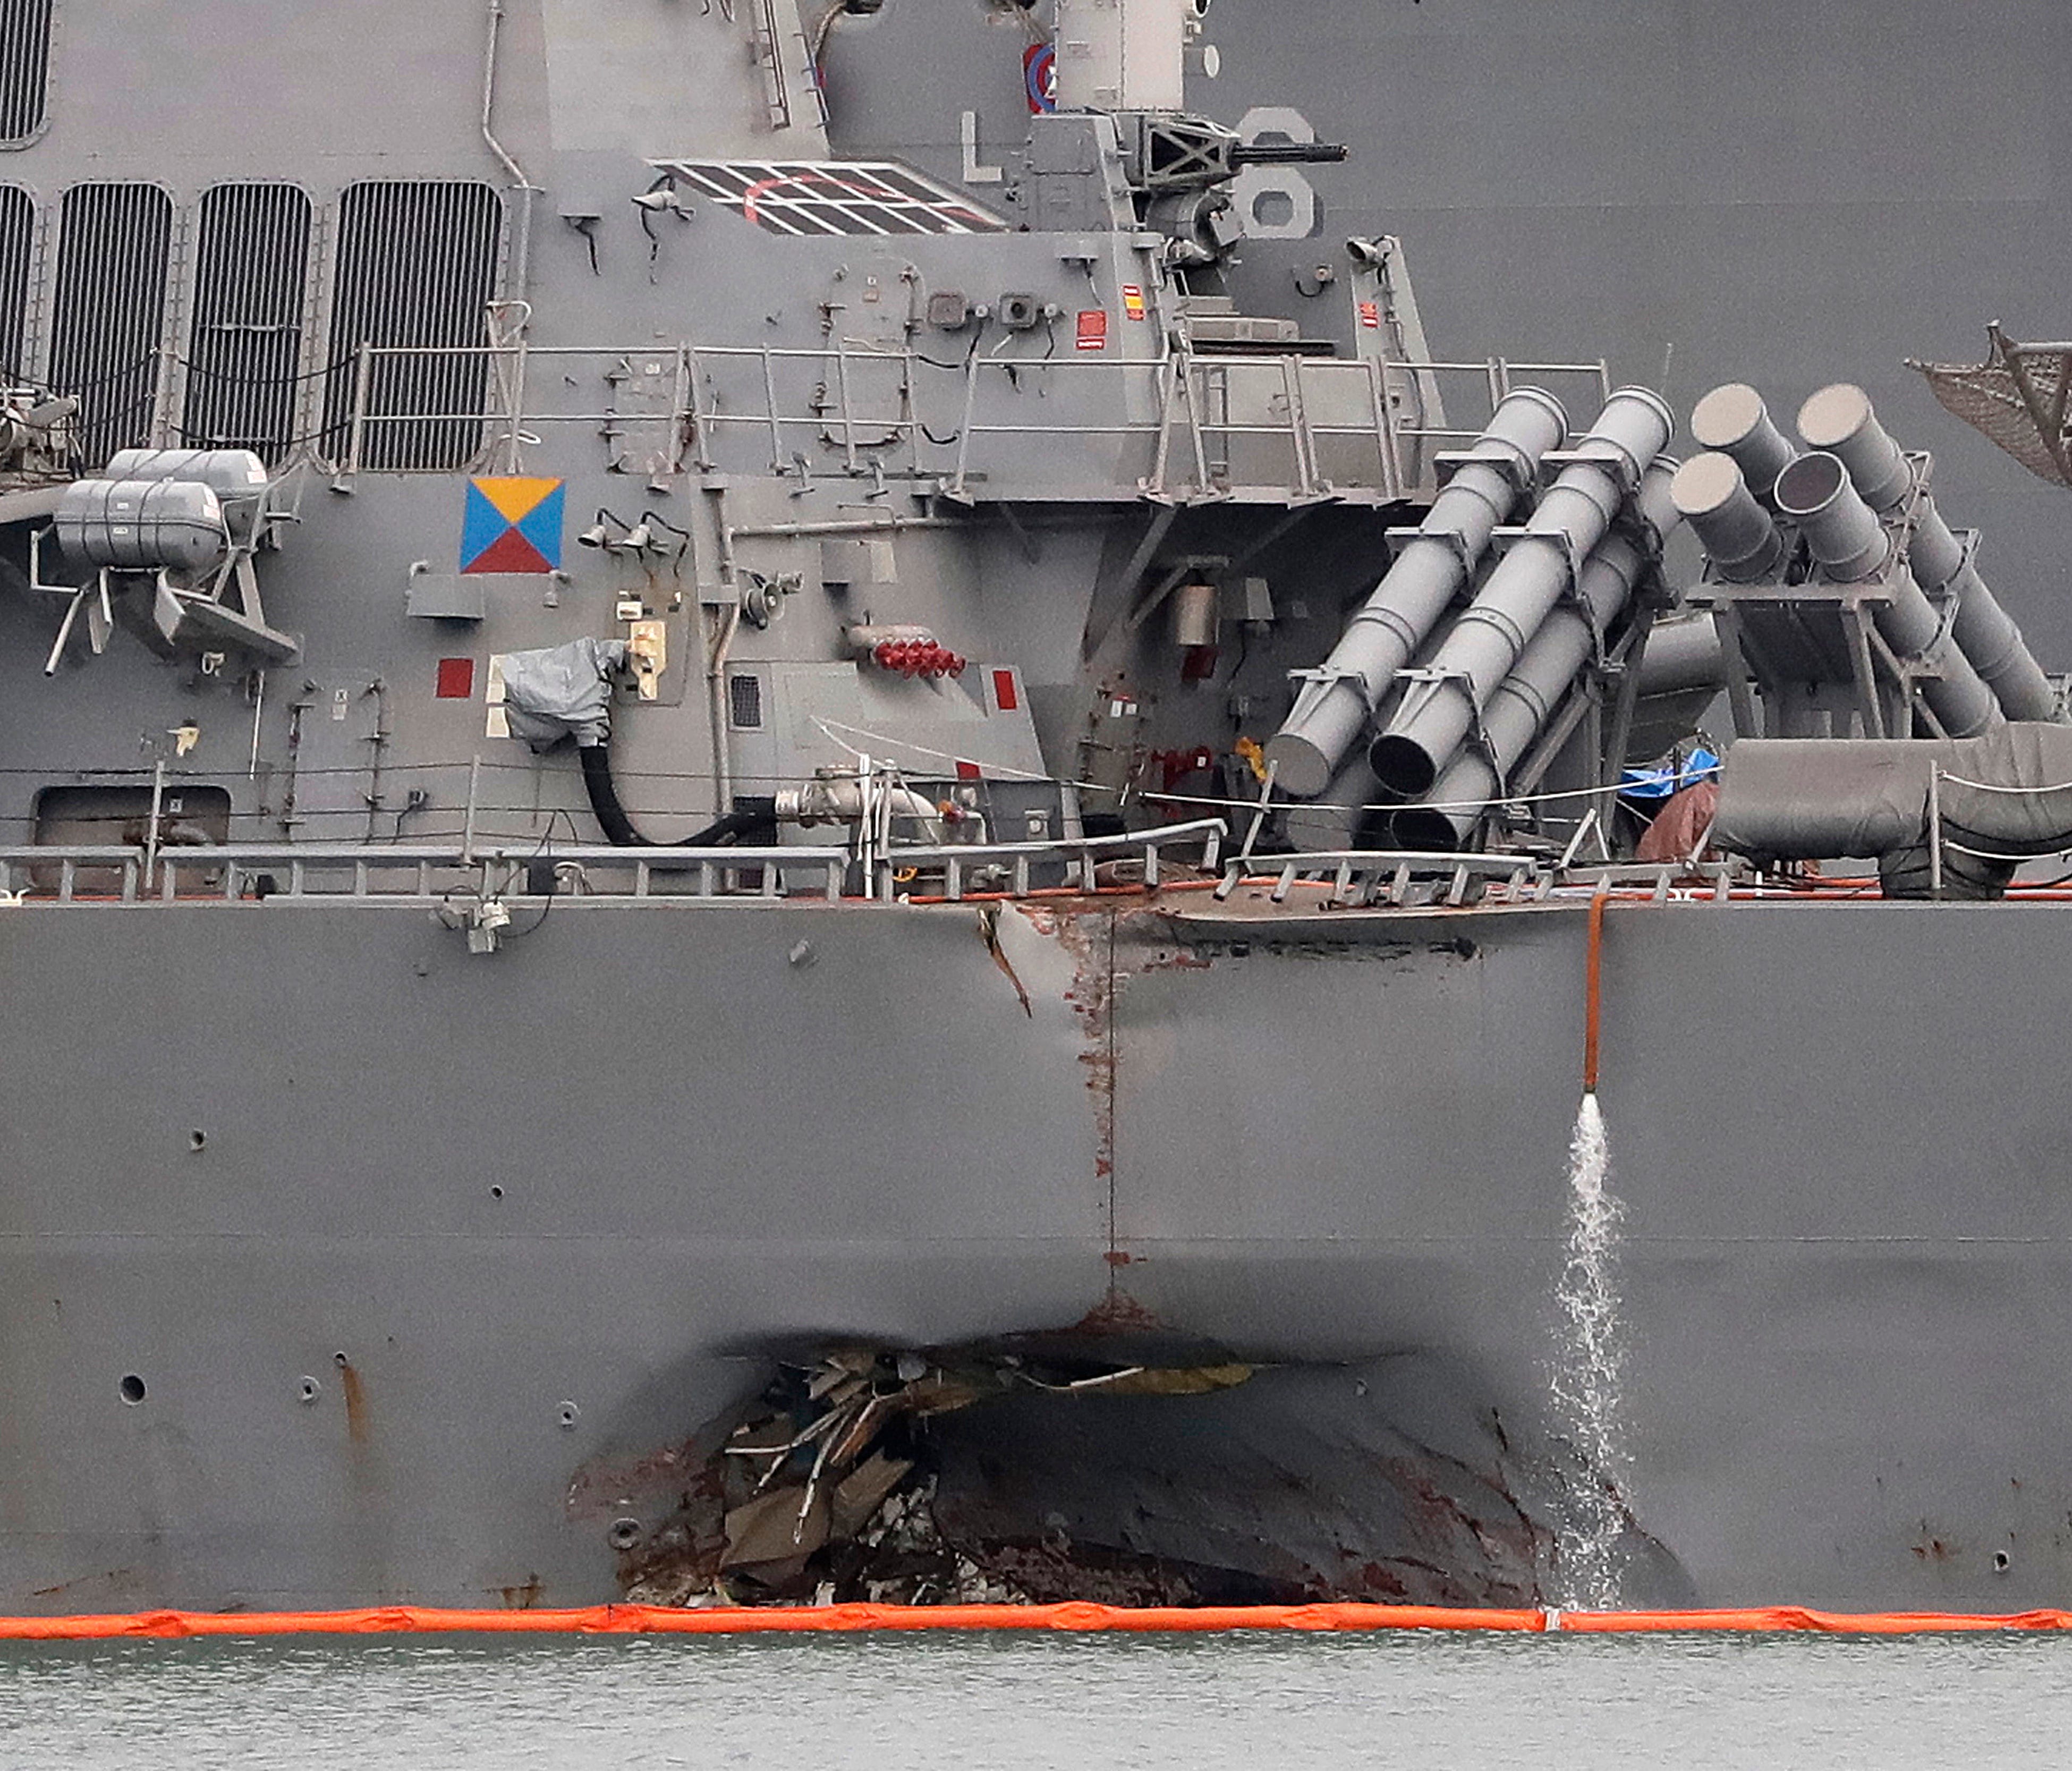 The damaged port aft hull of USS John S. McCain, is seen while docked at Singapore's Changi naval base on  Aug. 22, 2017 in Singapore. The focus of the search for 10 U.S. sailors missing after a collision between the USS John S. McCain and an oil tan